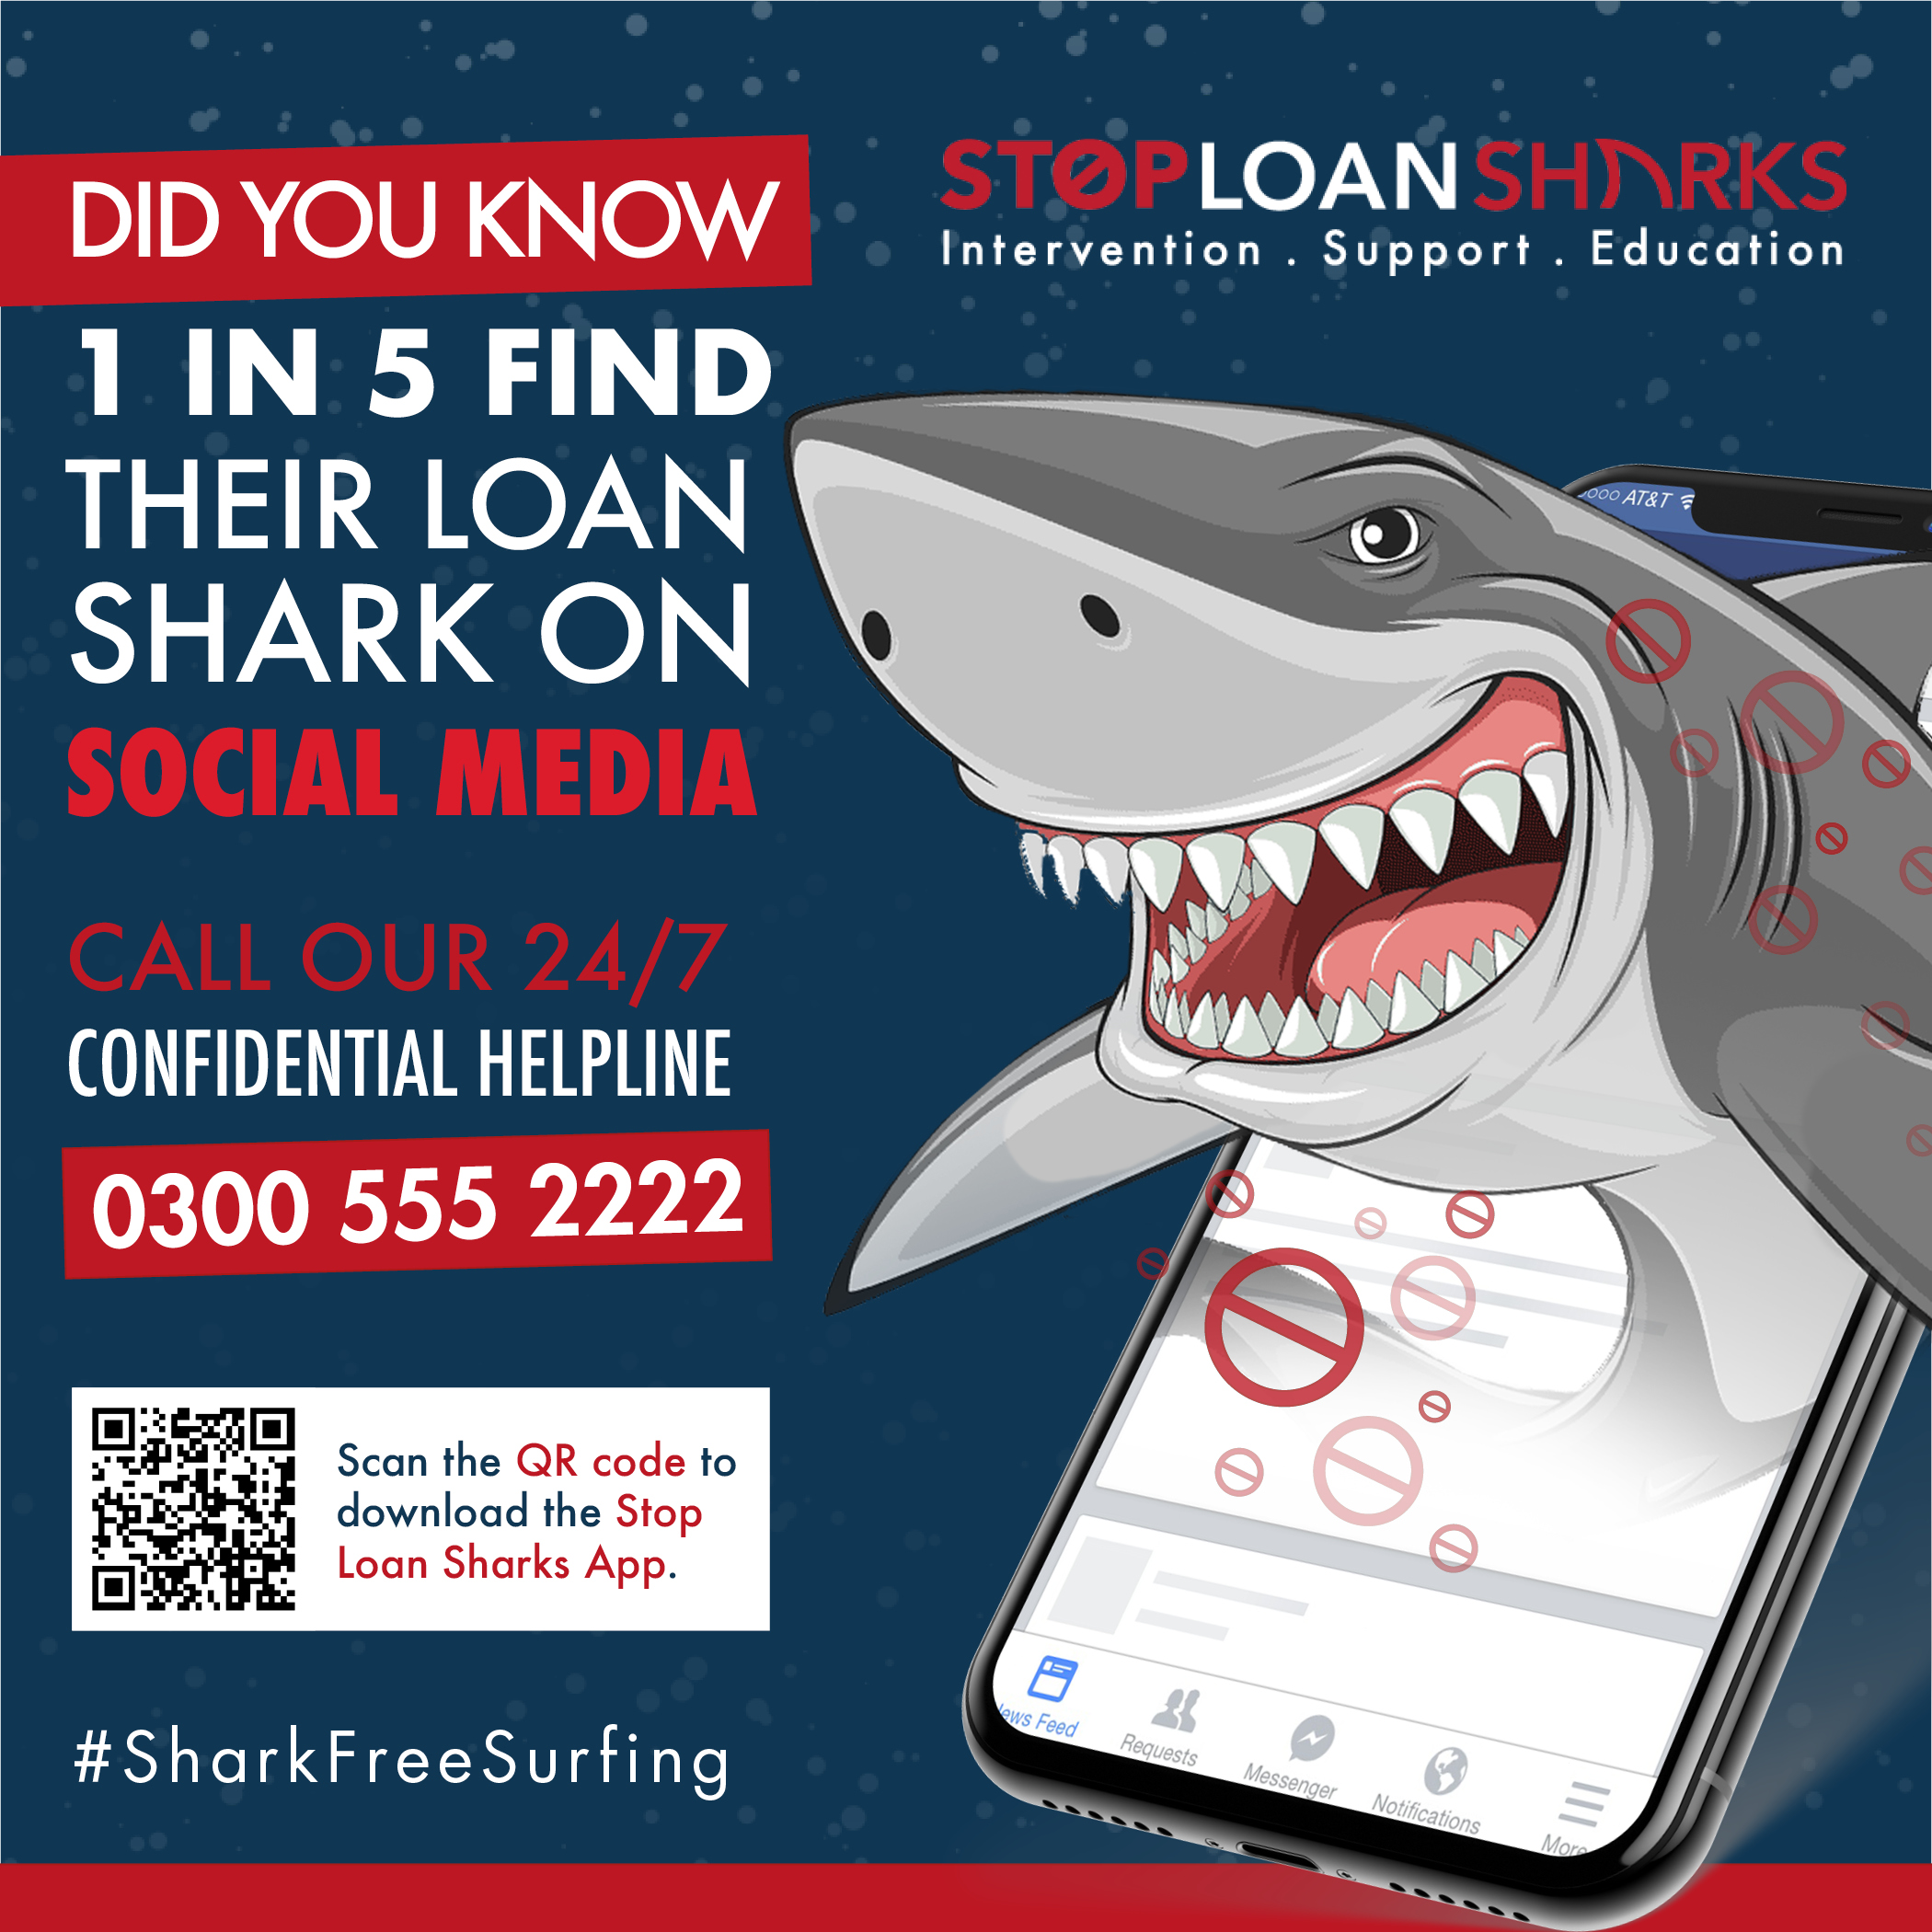 New campaign launched to tackle online loan sharks - Stop Loan Sharks